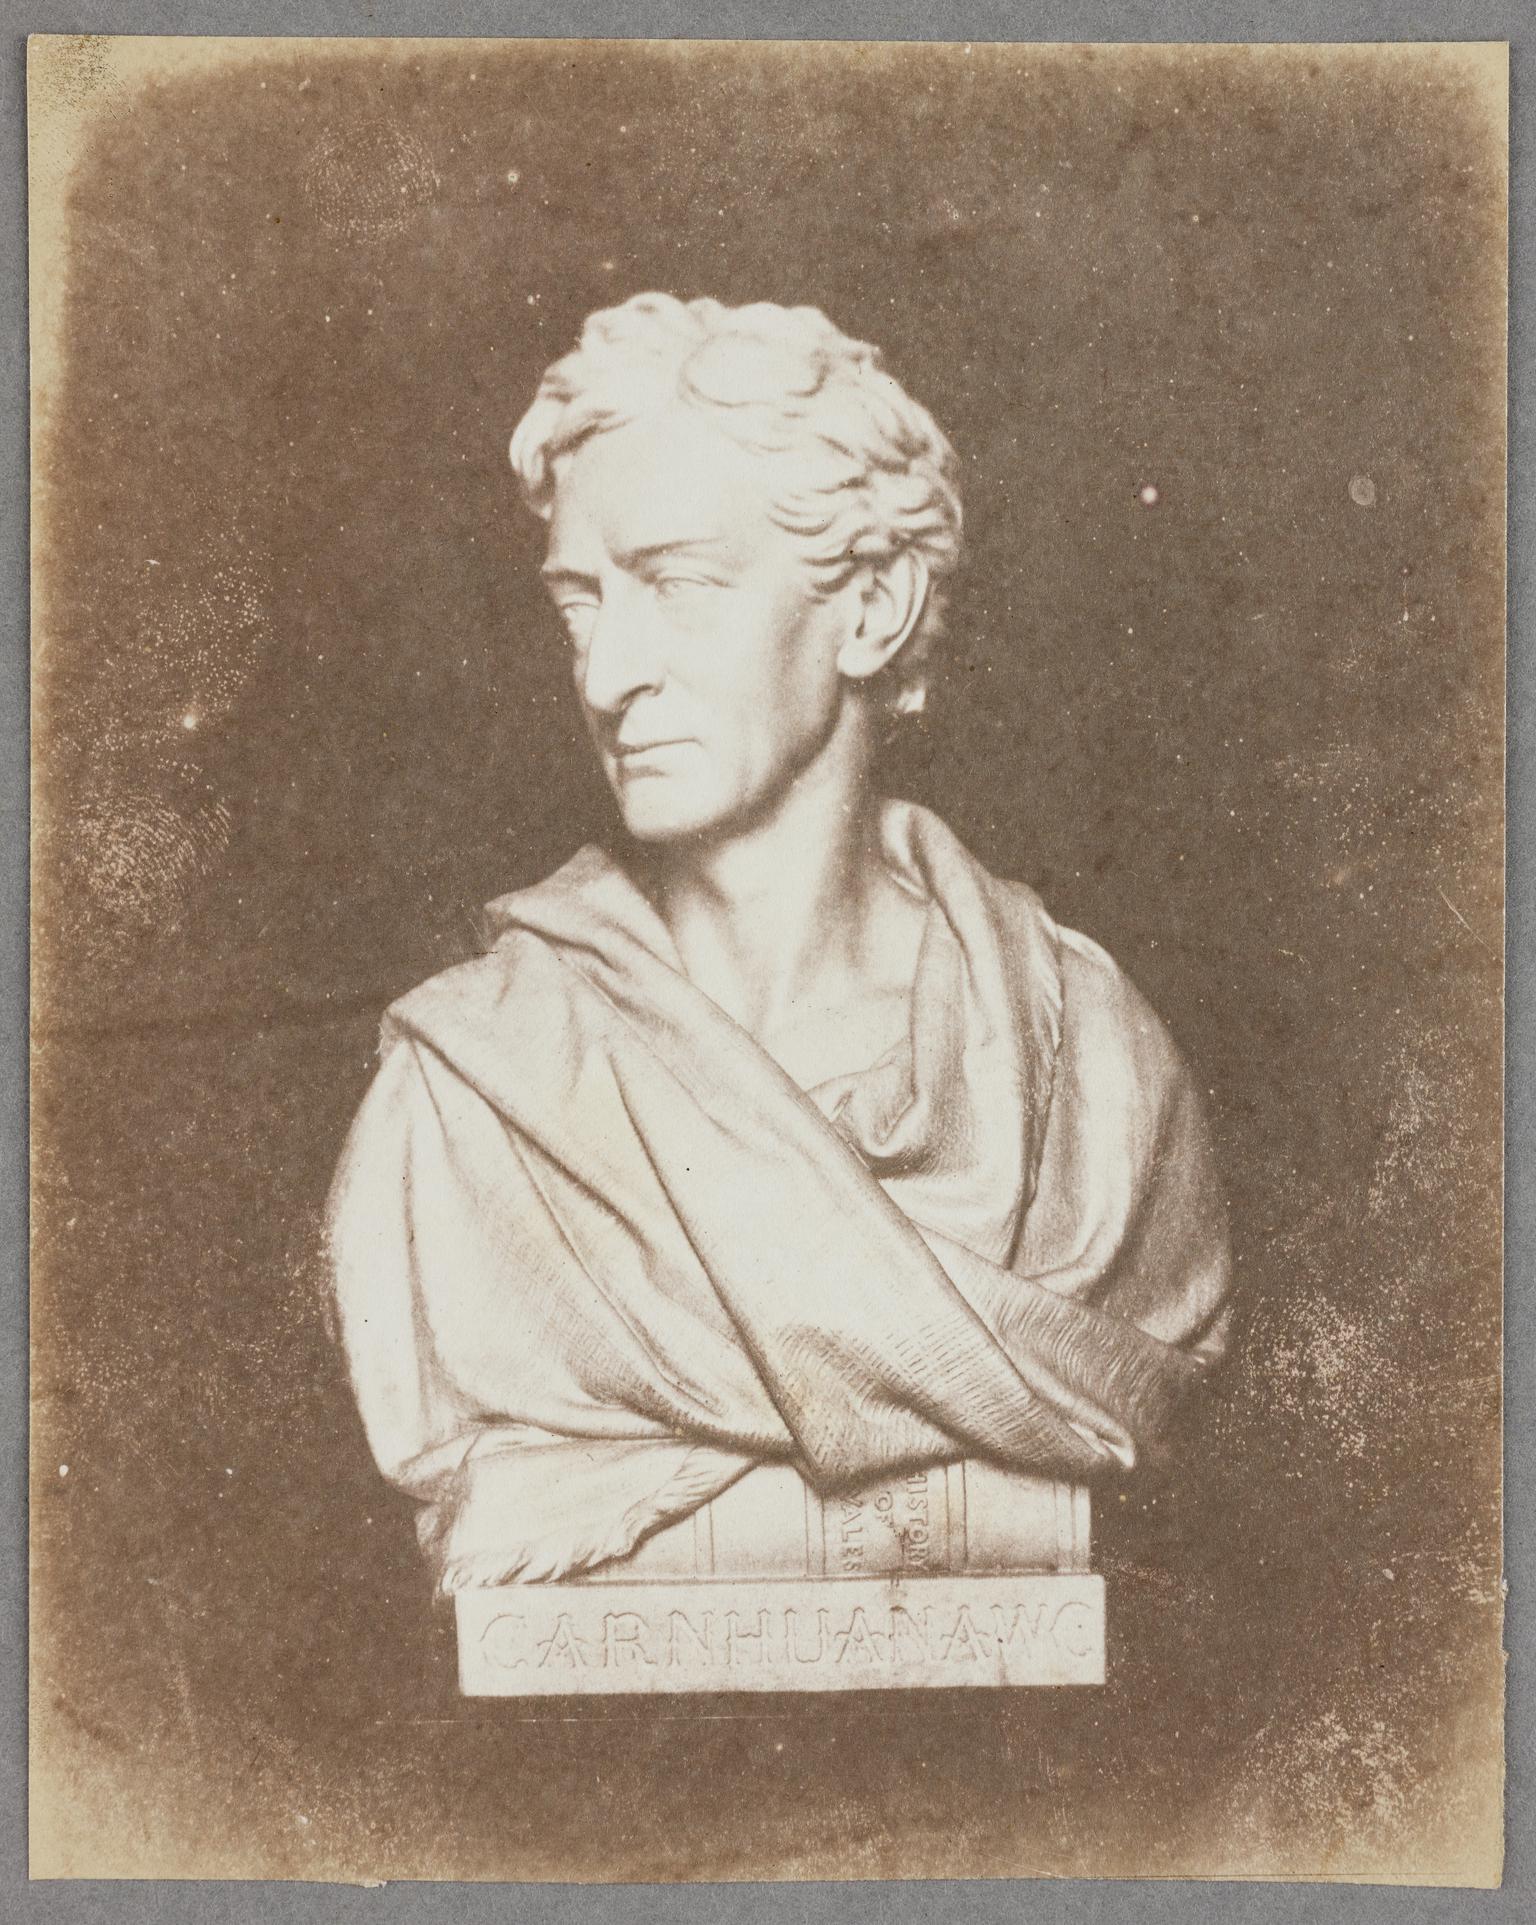 Bust of Thomas Price 'Carnhuanawc', photograph